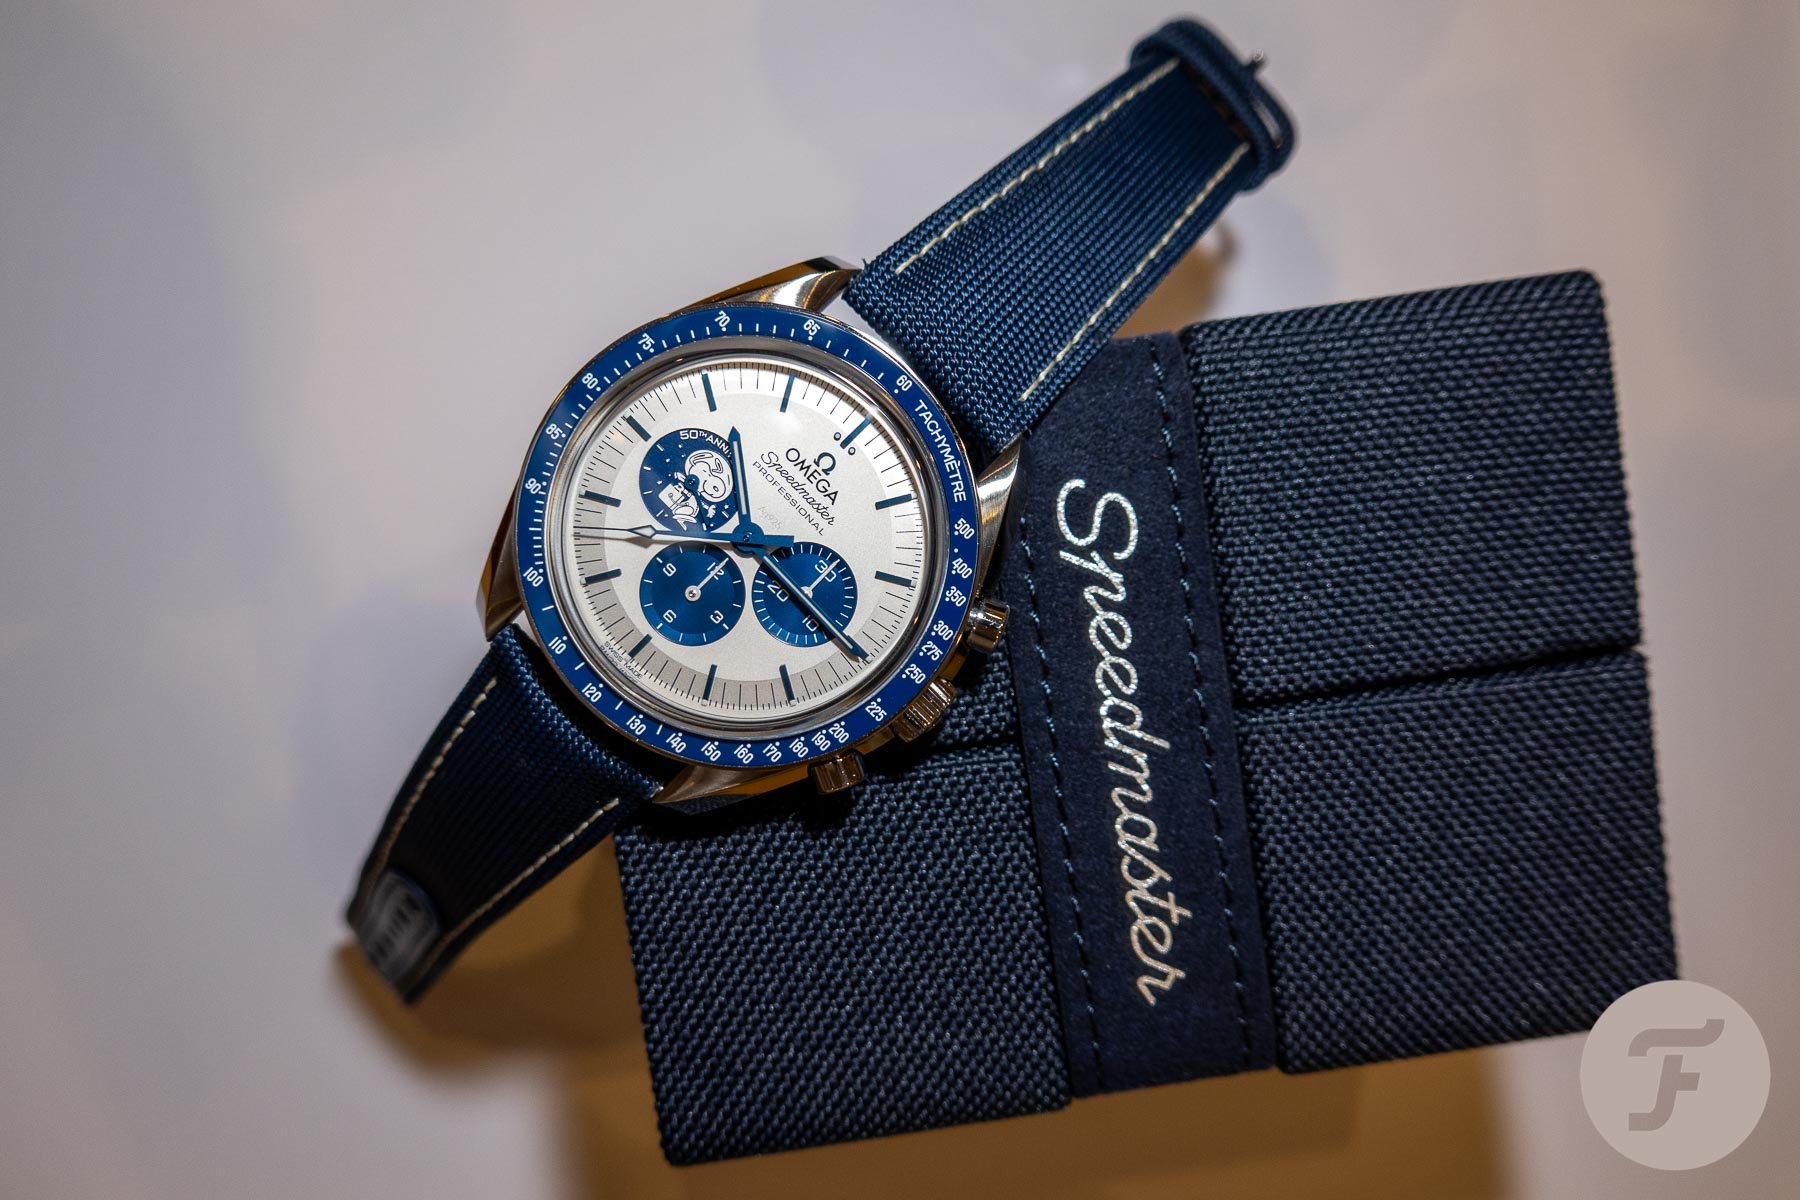 Omega Speedmaster Silver Snoopy Award 50th Anniversary // Review